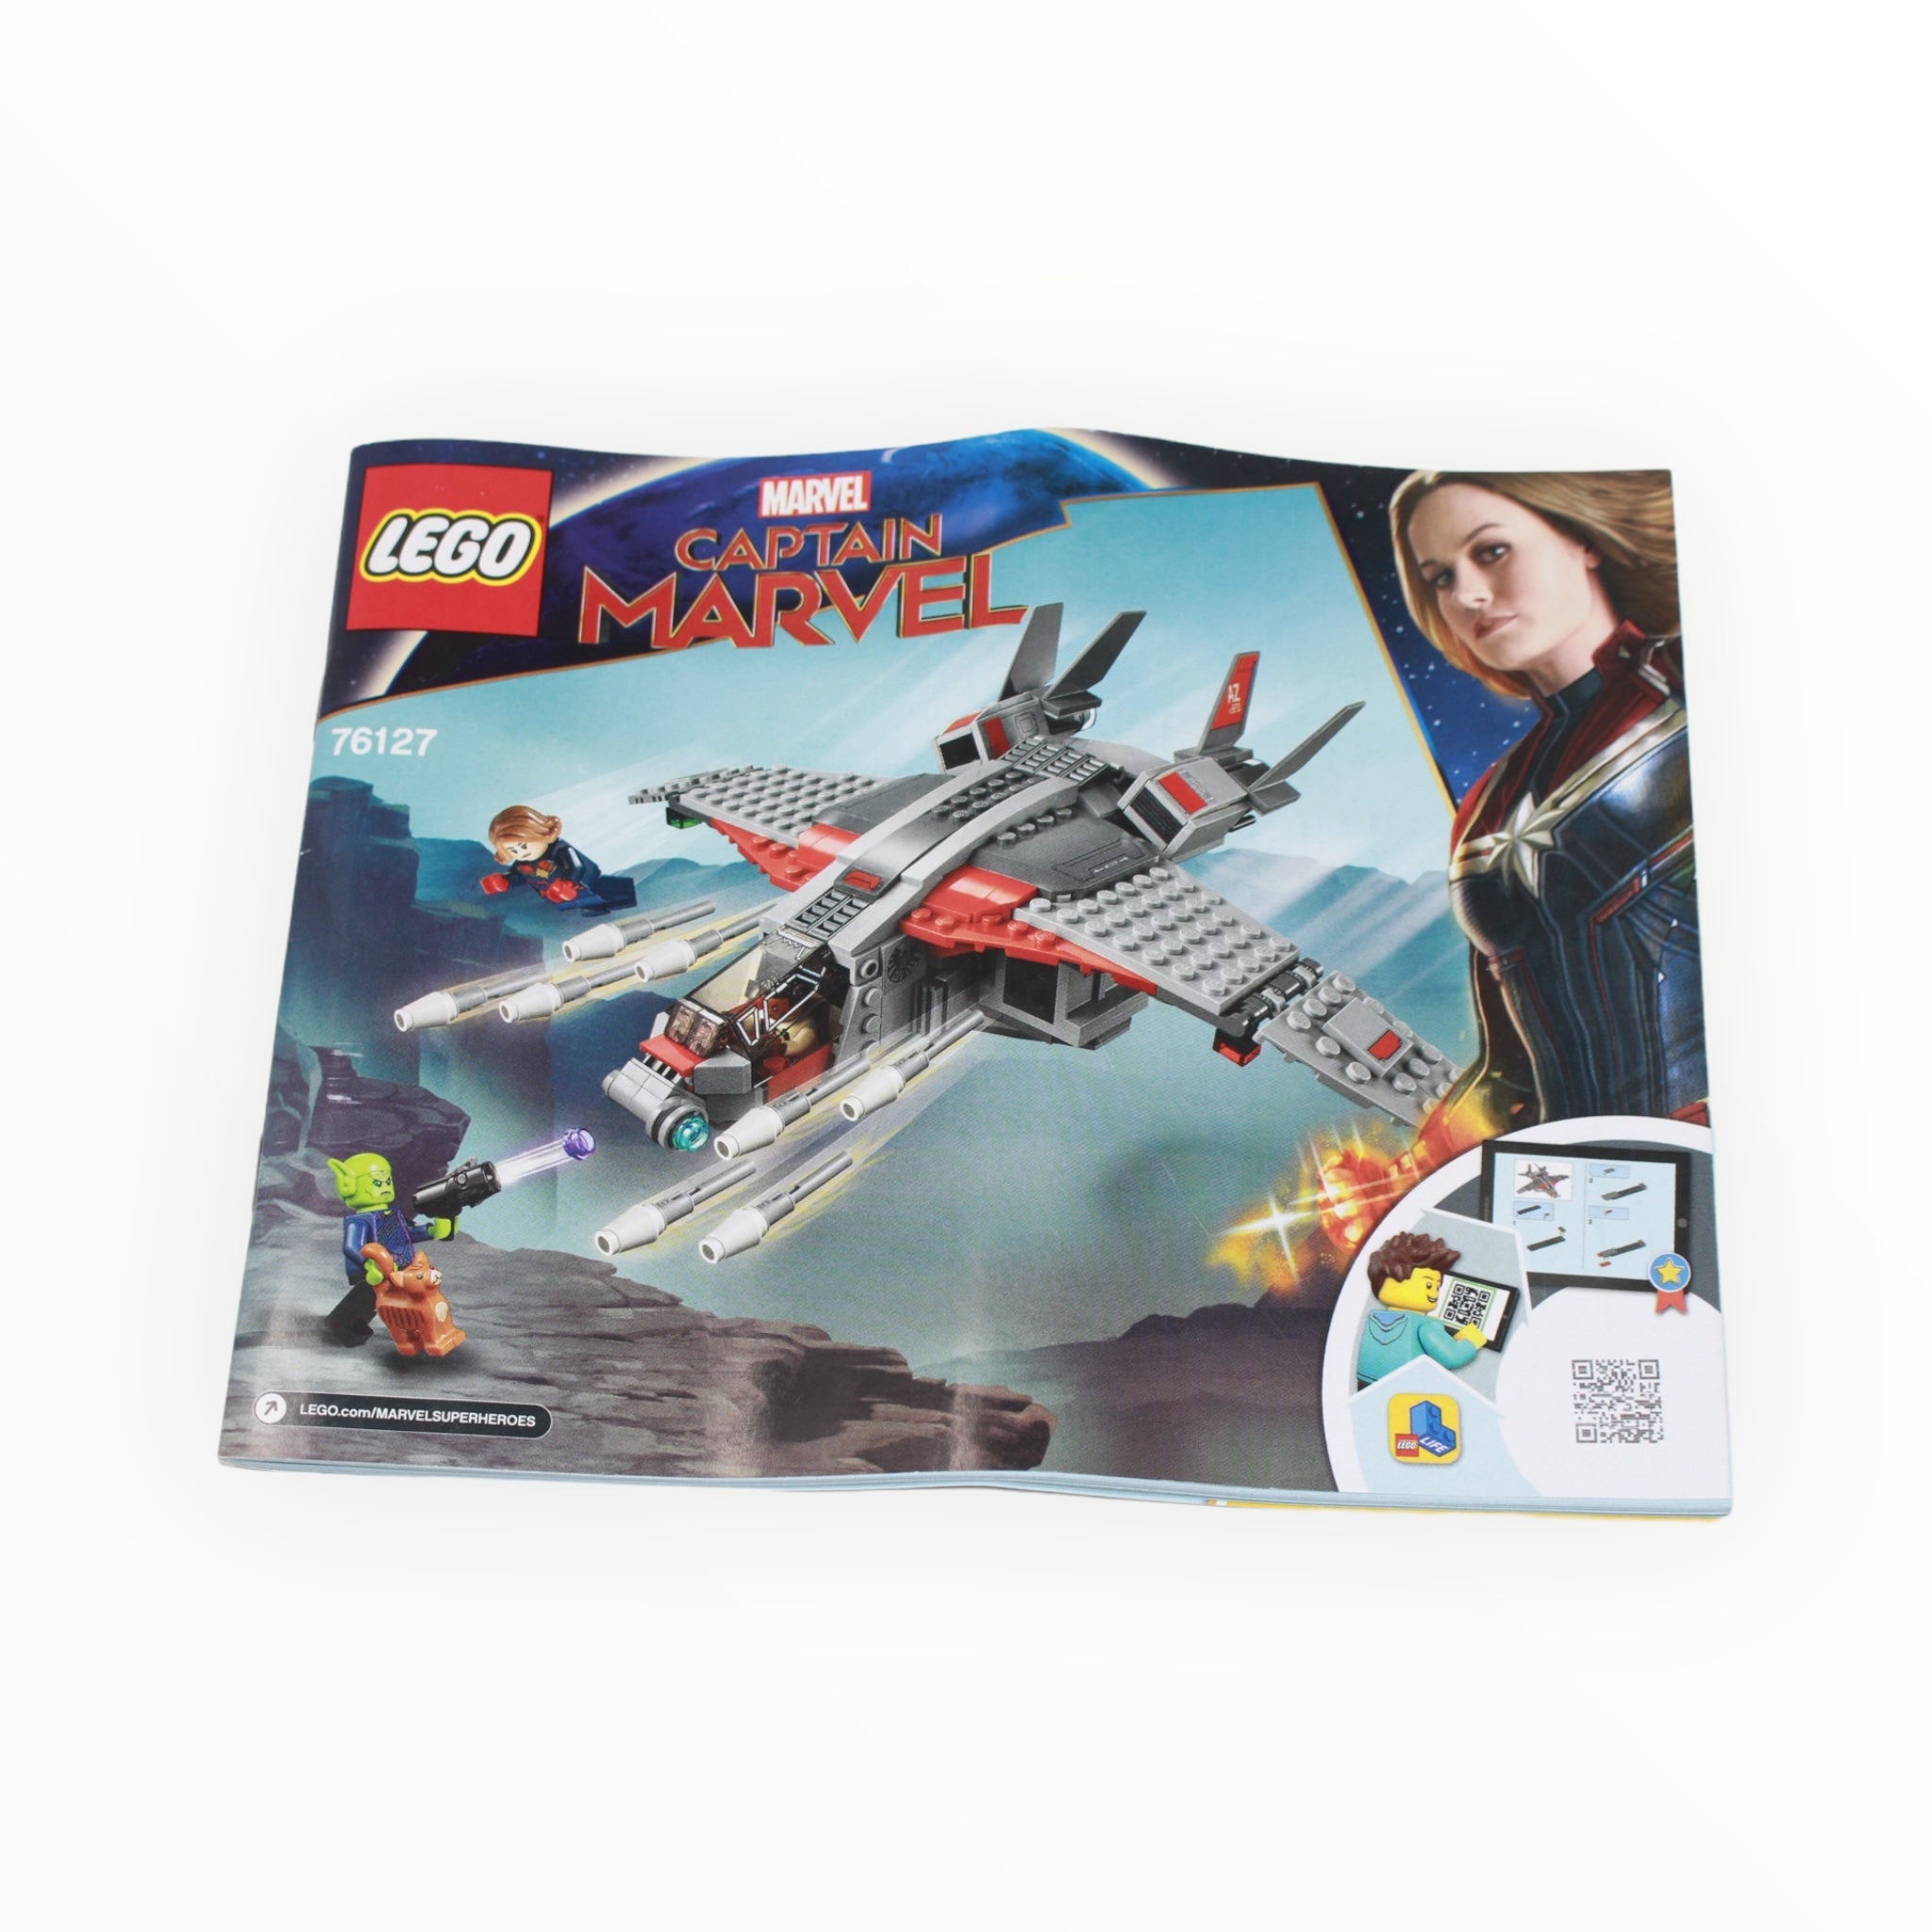 Used Set 76127 Captain Marvel and the Skrull Attack